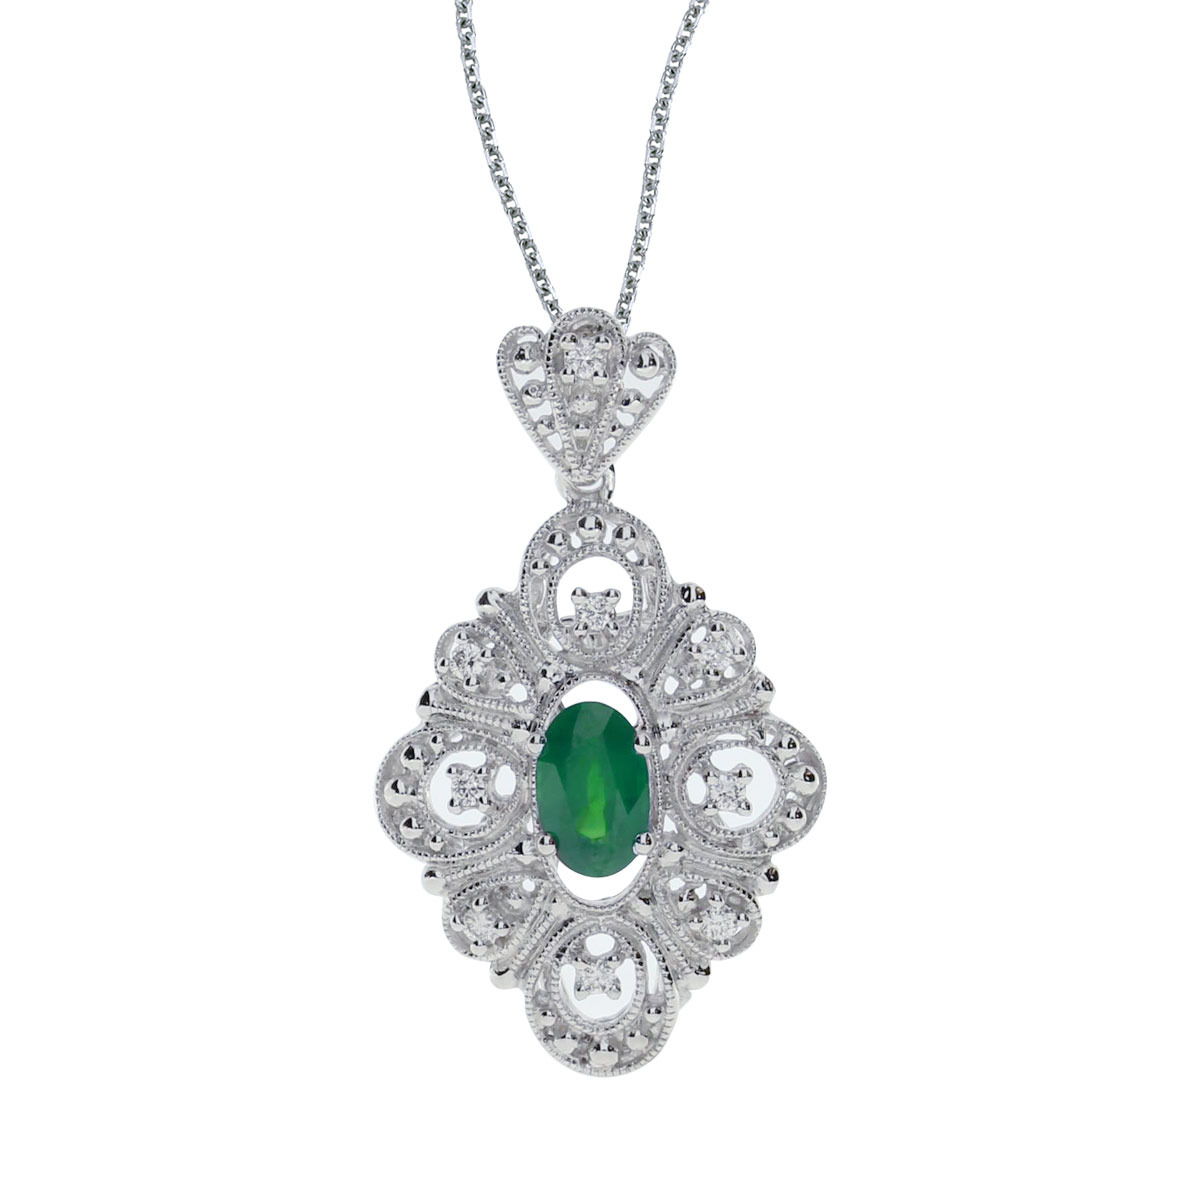 This beautiful 14k white gold pendant features a bright 6x4 mm oval emerald and .08 carats of shi...